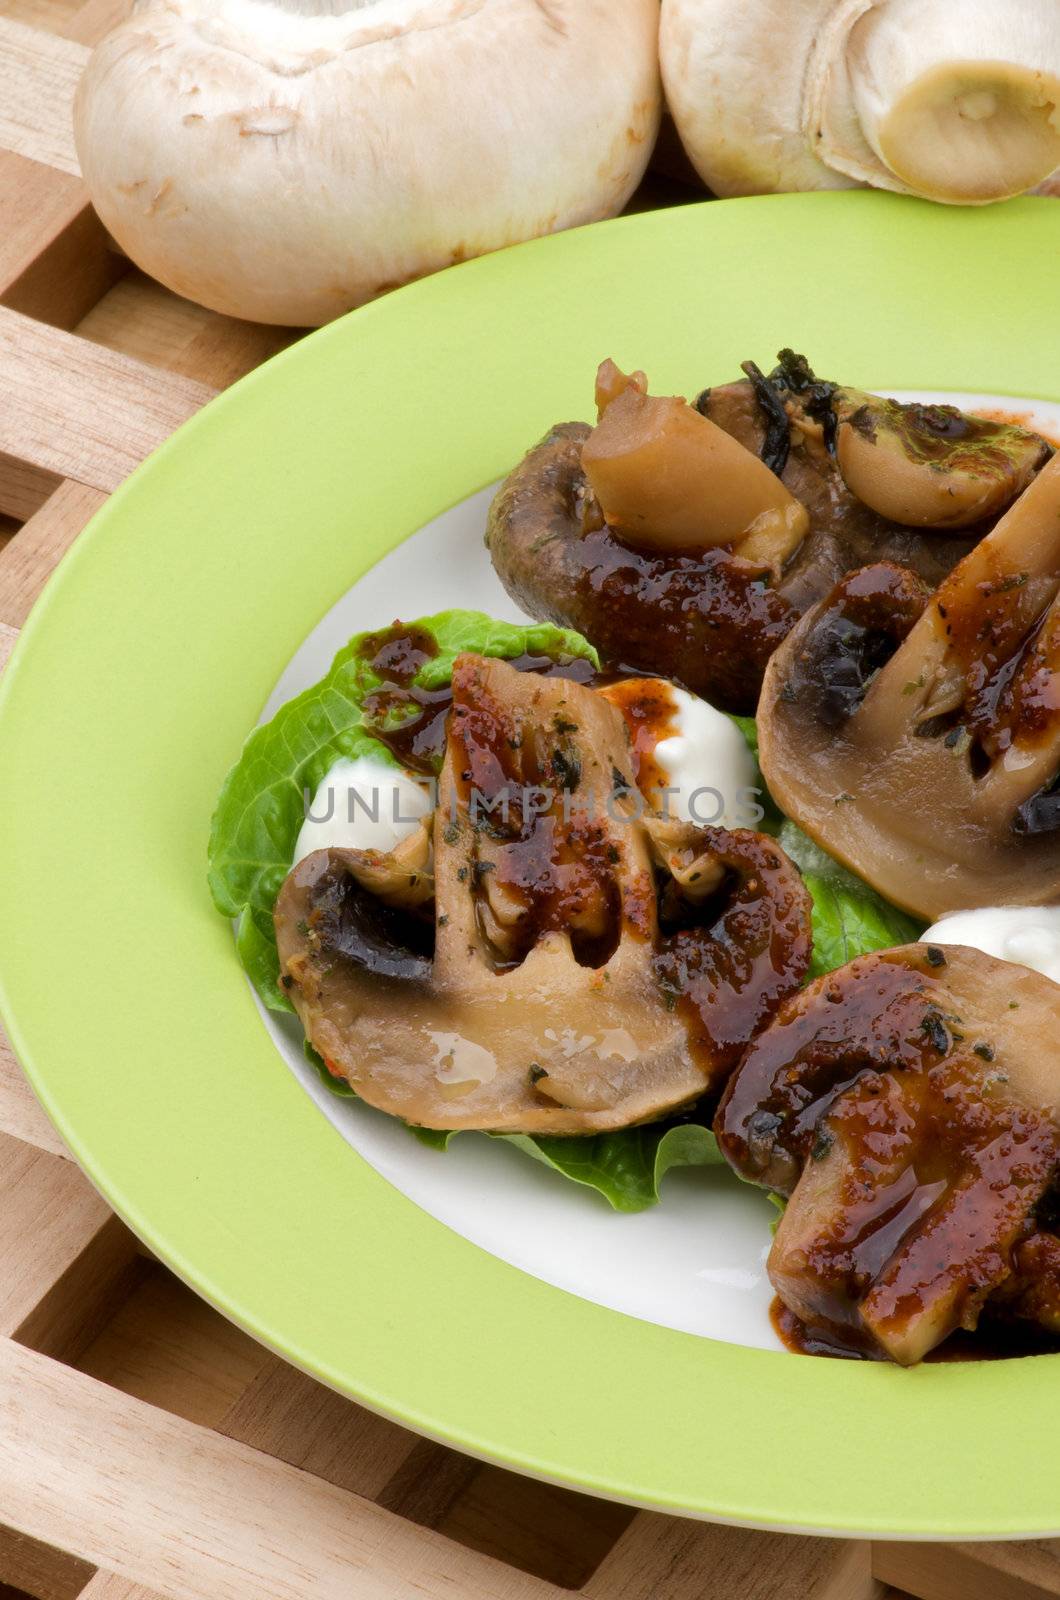 Cooked Mushrooms by zhekos